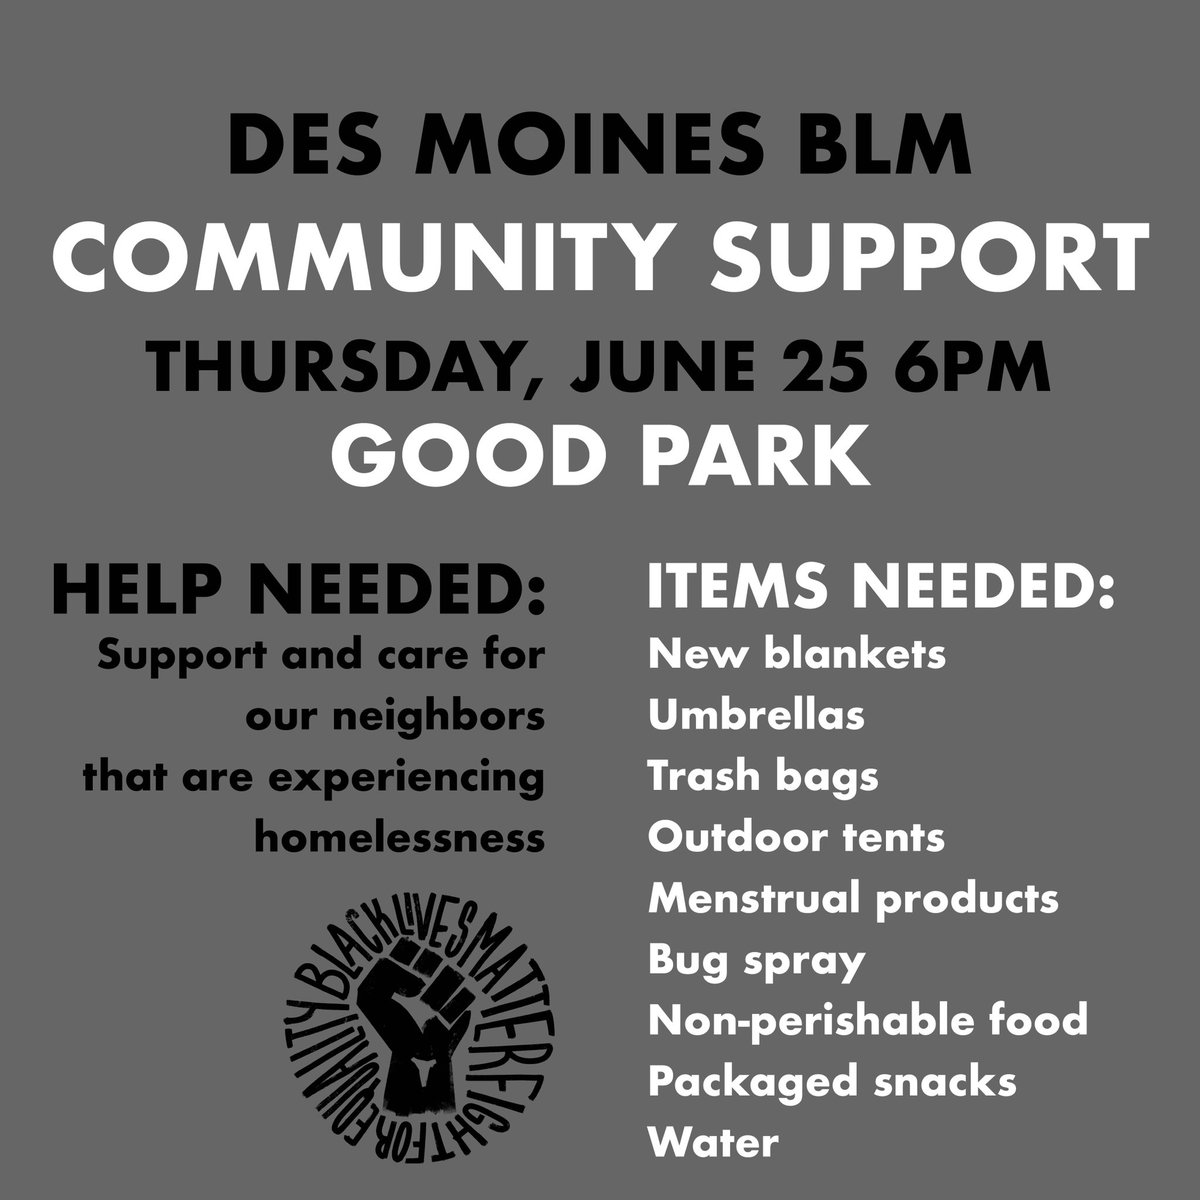 THURSDAY Donations can be dropped off prior to the event at Urban Dreams in DSM between 9am-5pm.